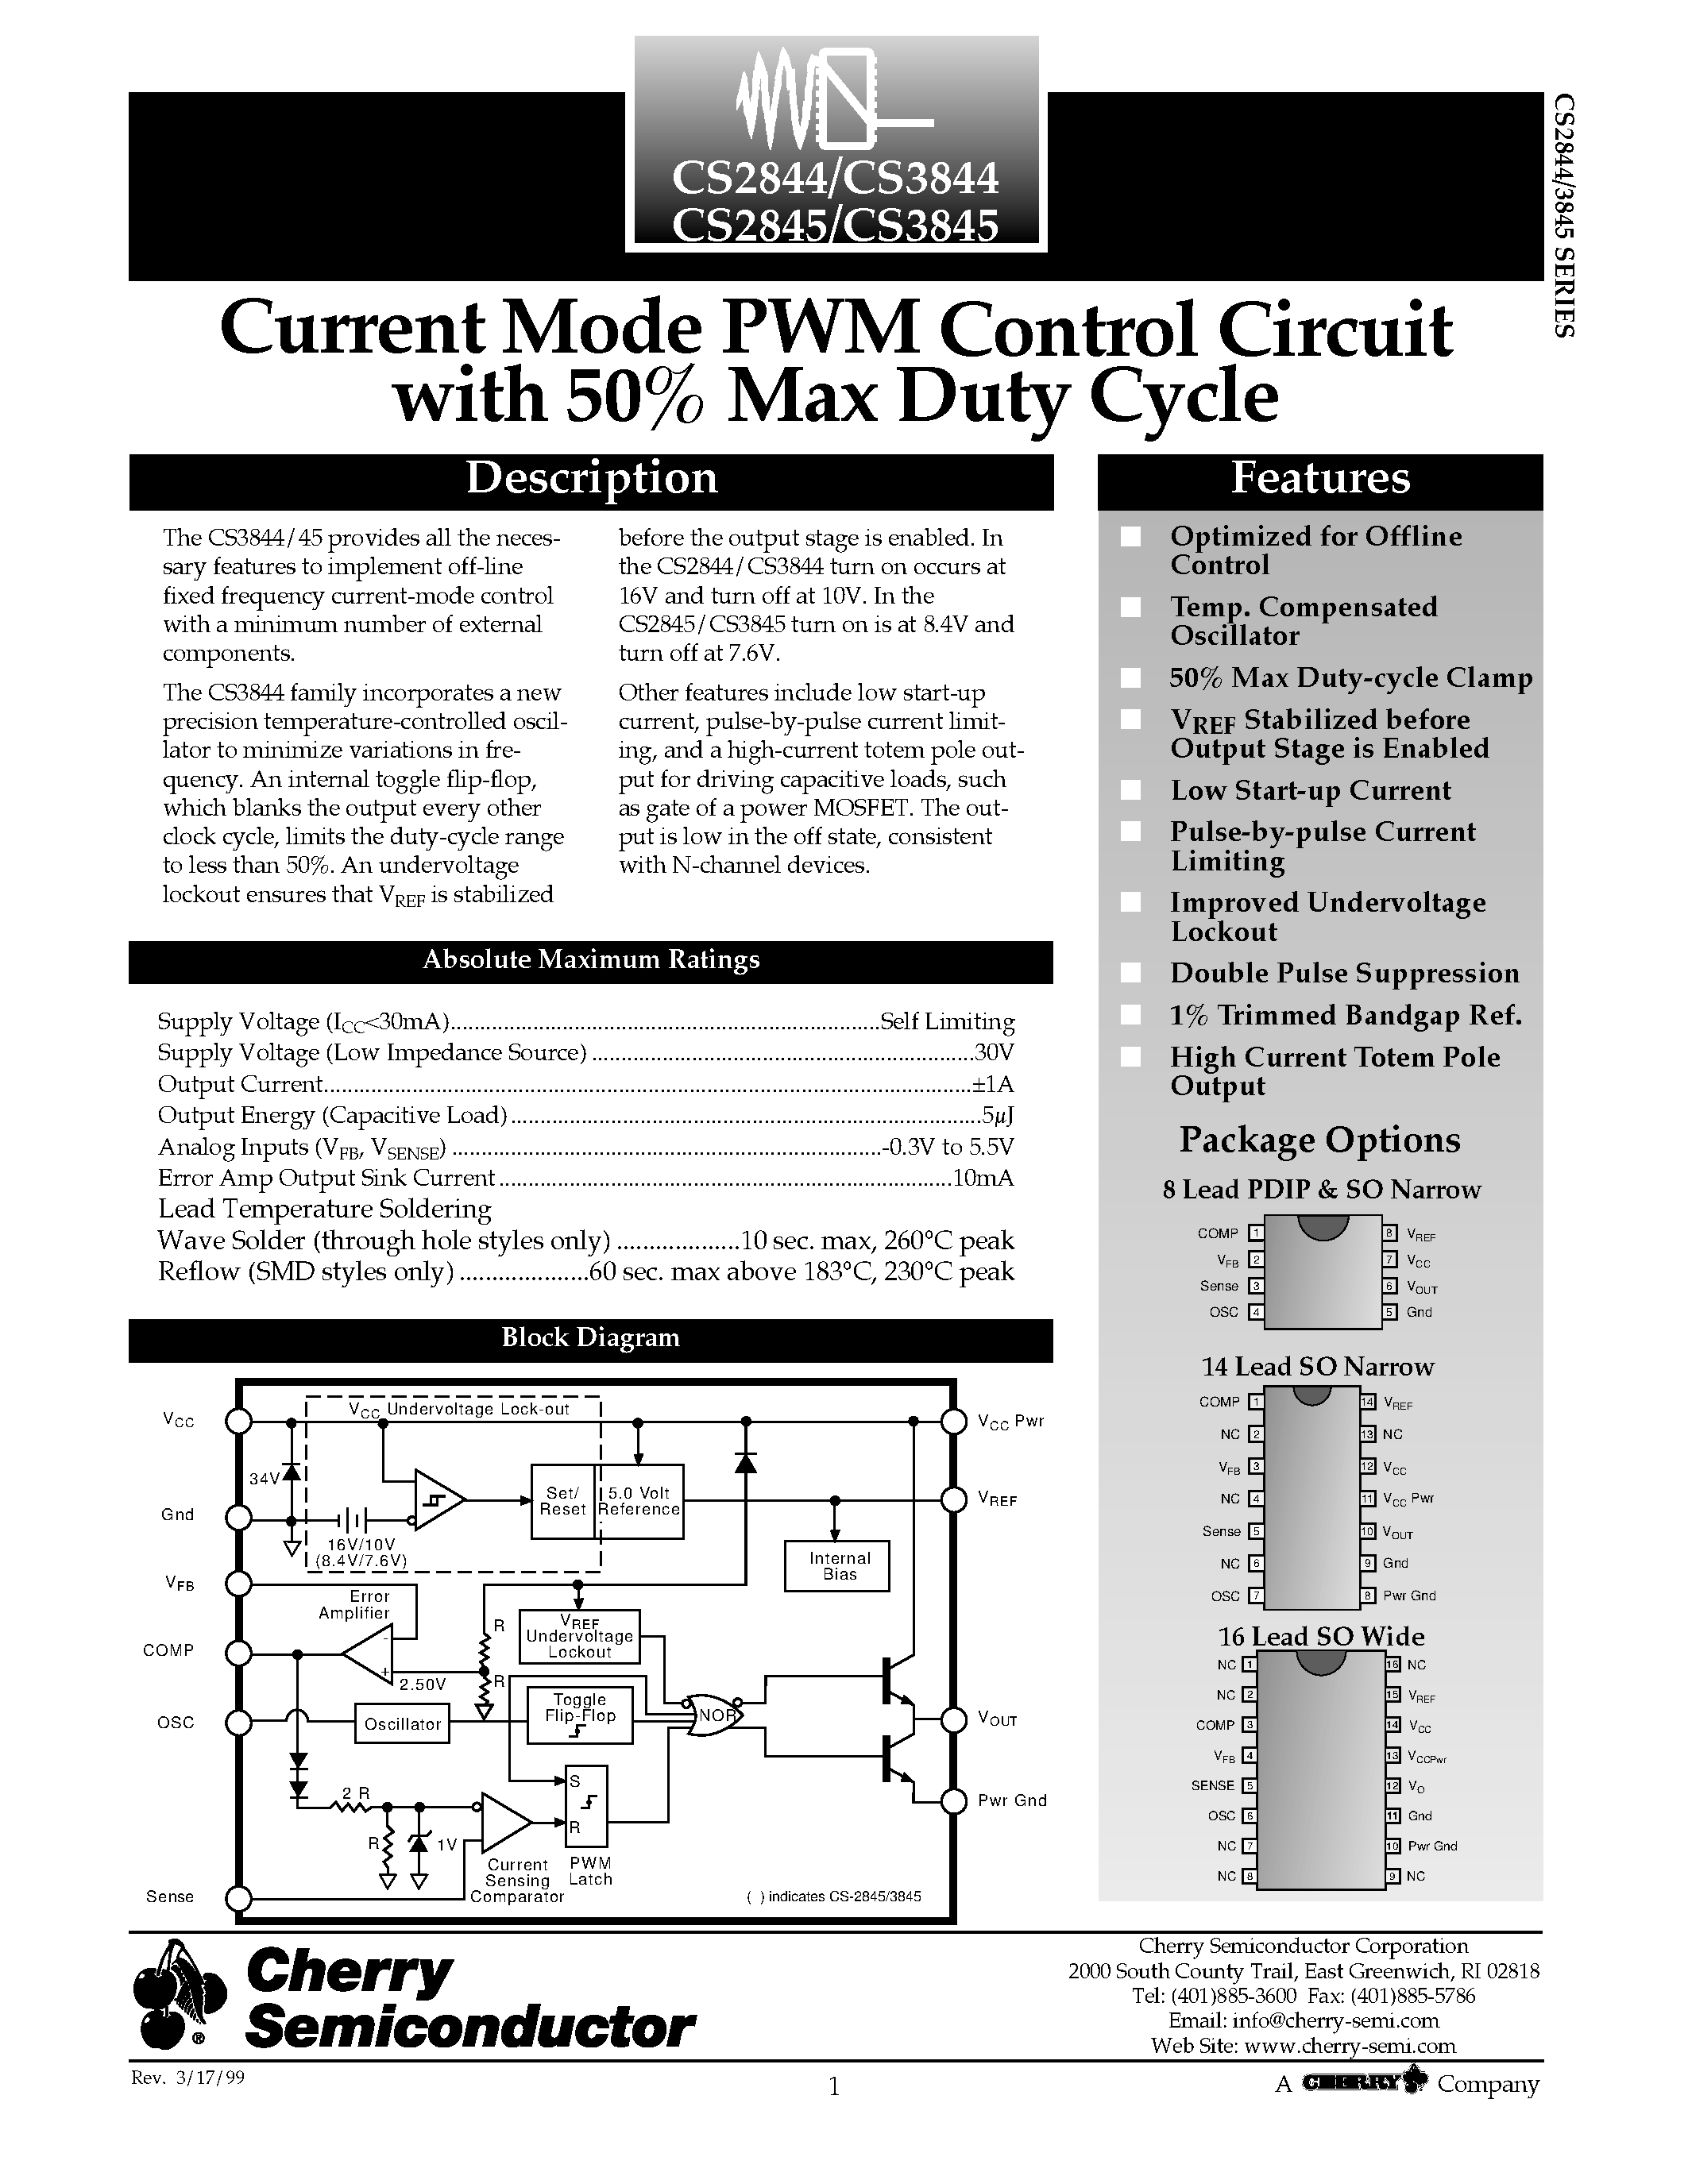 Datasheet CS2844LDR14 - Current Mode PWM Control Circuit with 50% Max Duty Cycle page 1